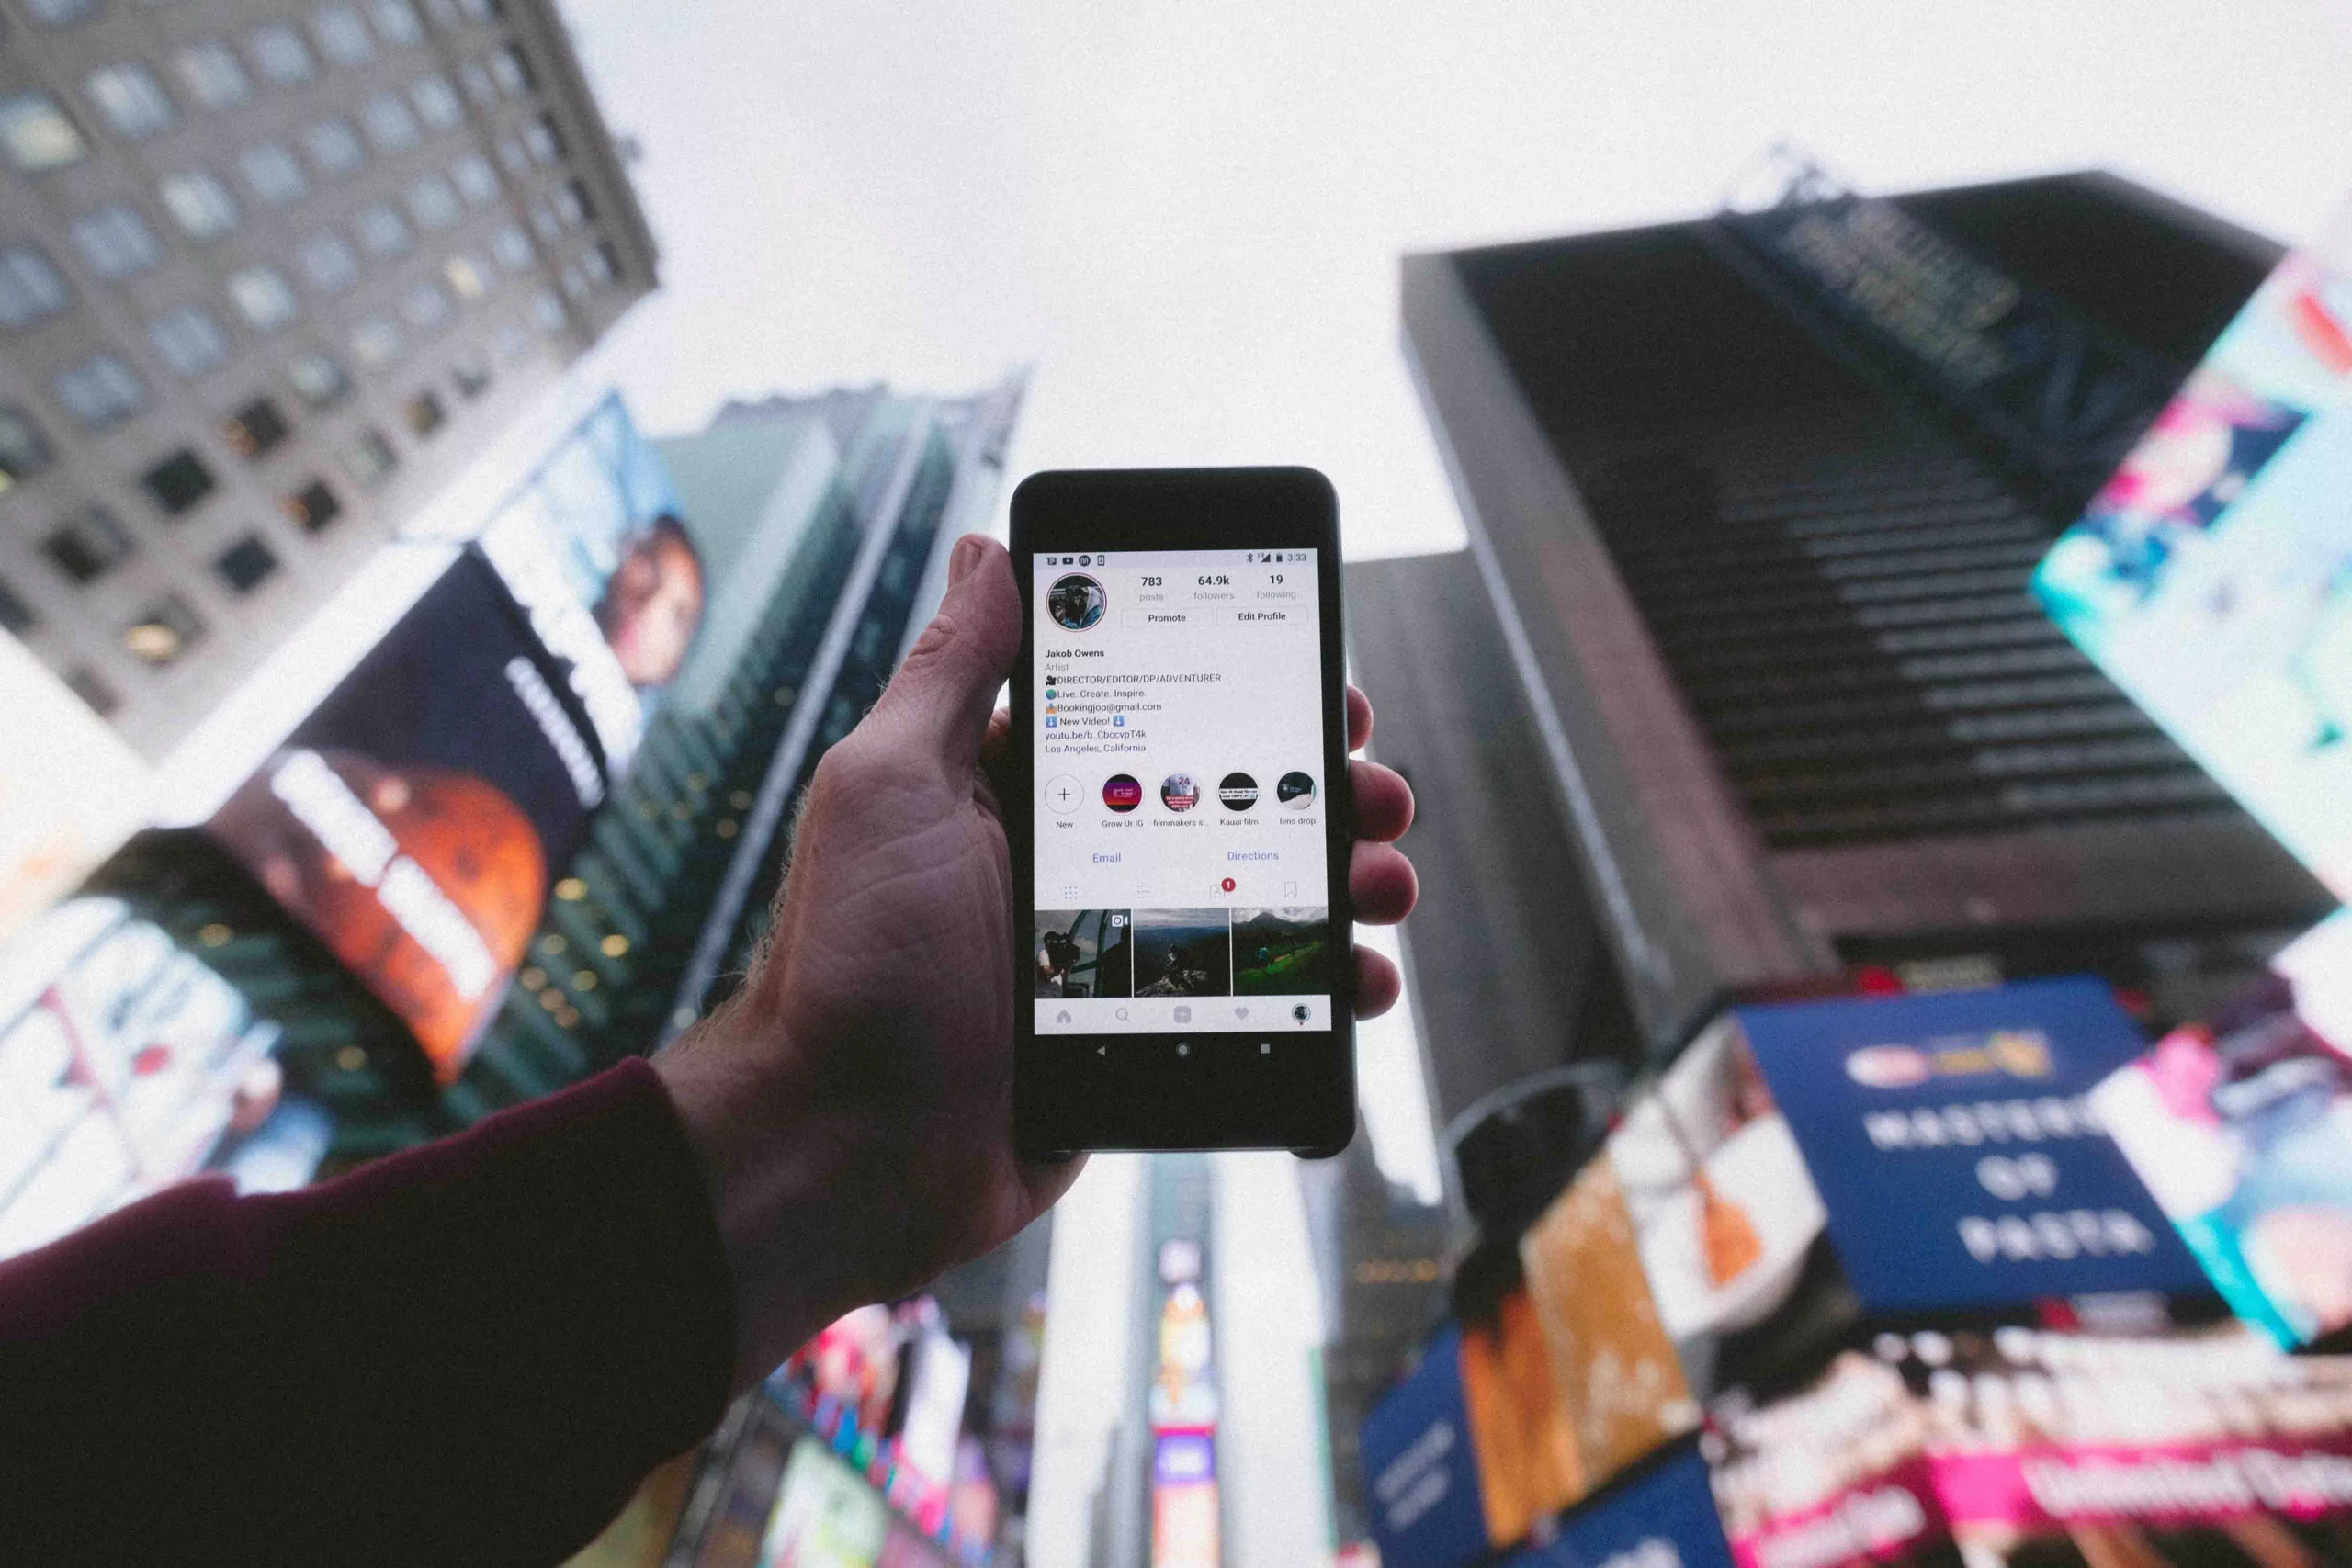 Hand holding smartphone with social media profile open against blurry cityscape with billboards.